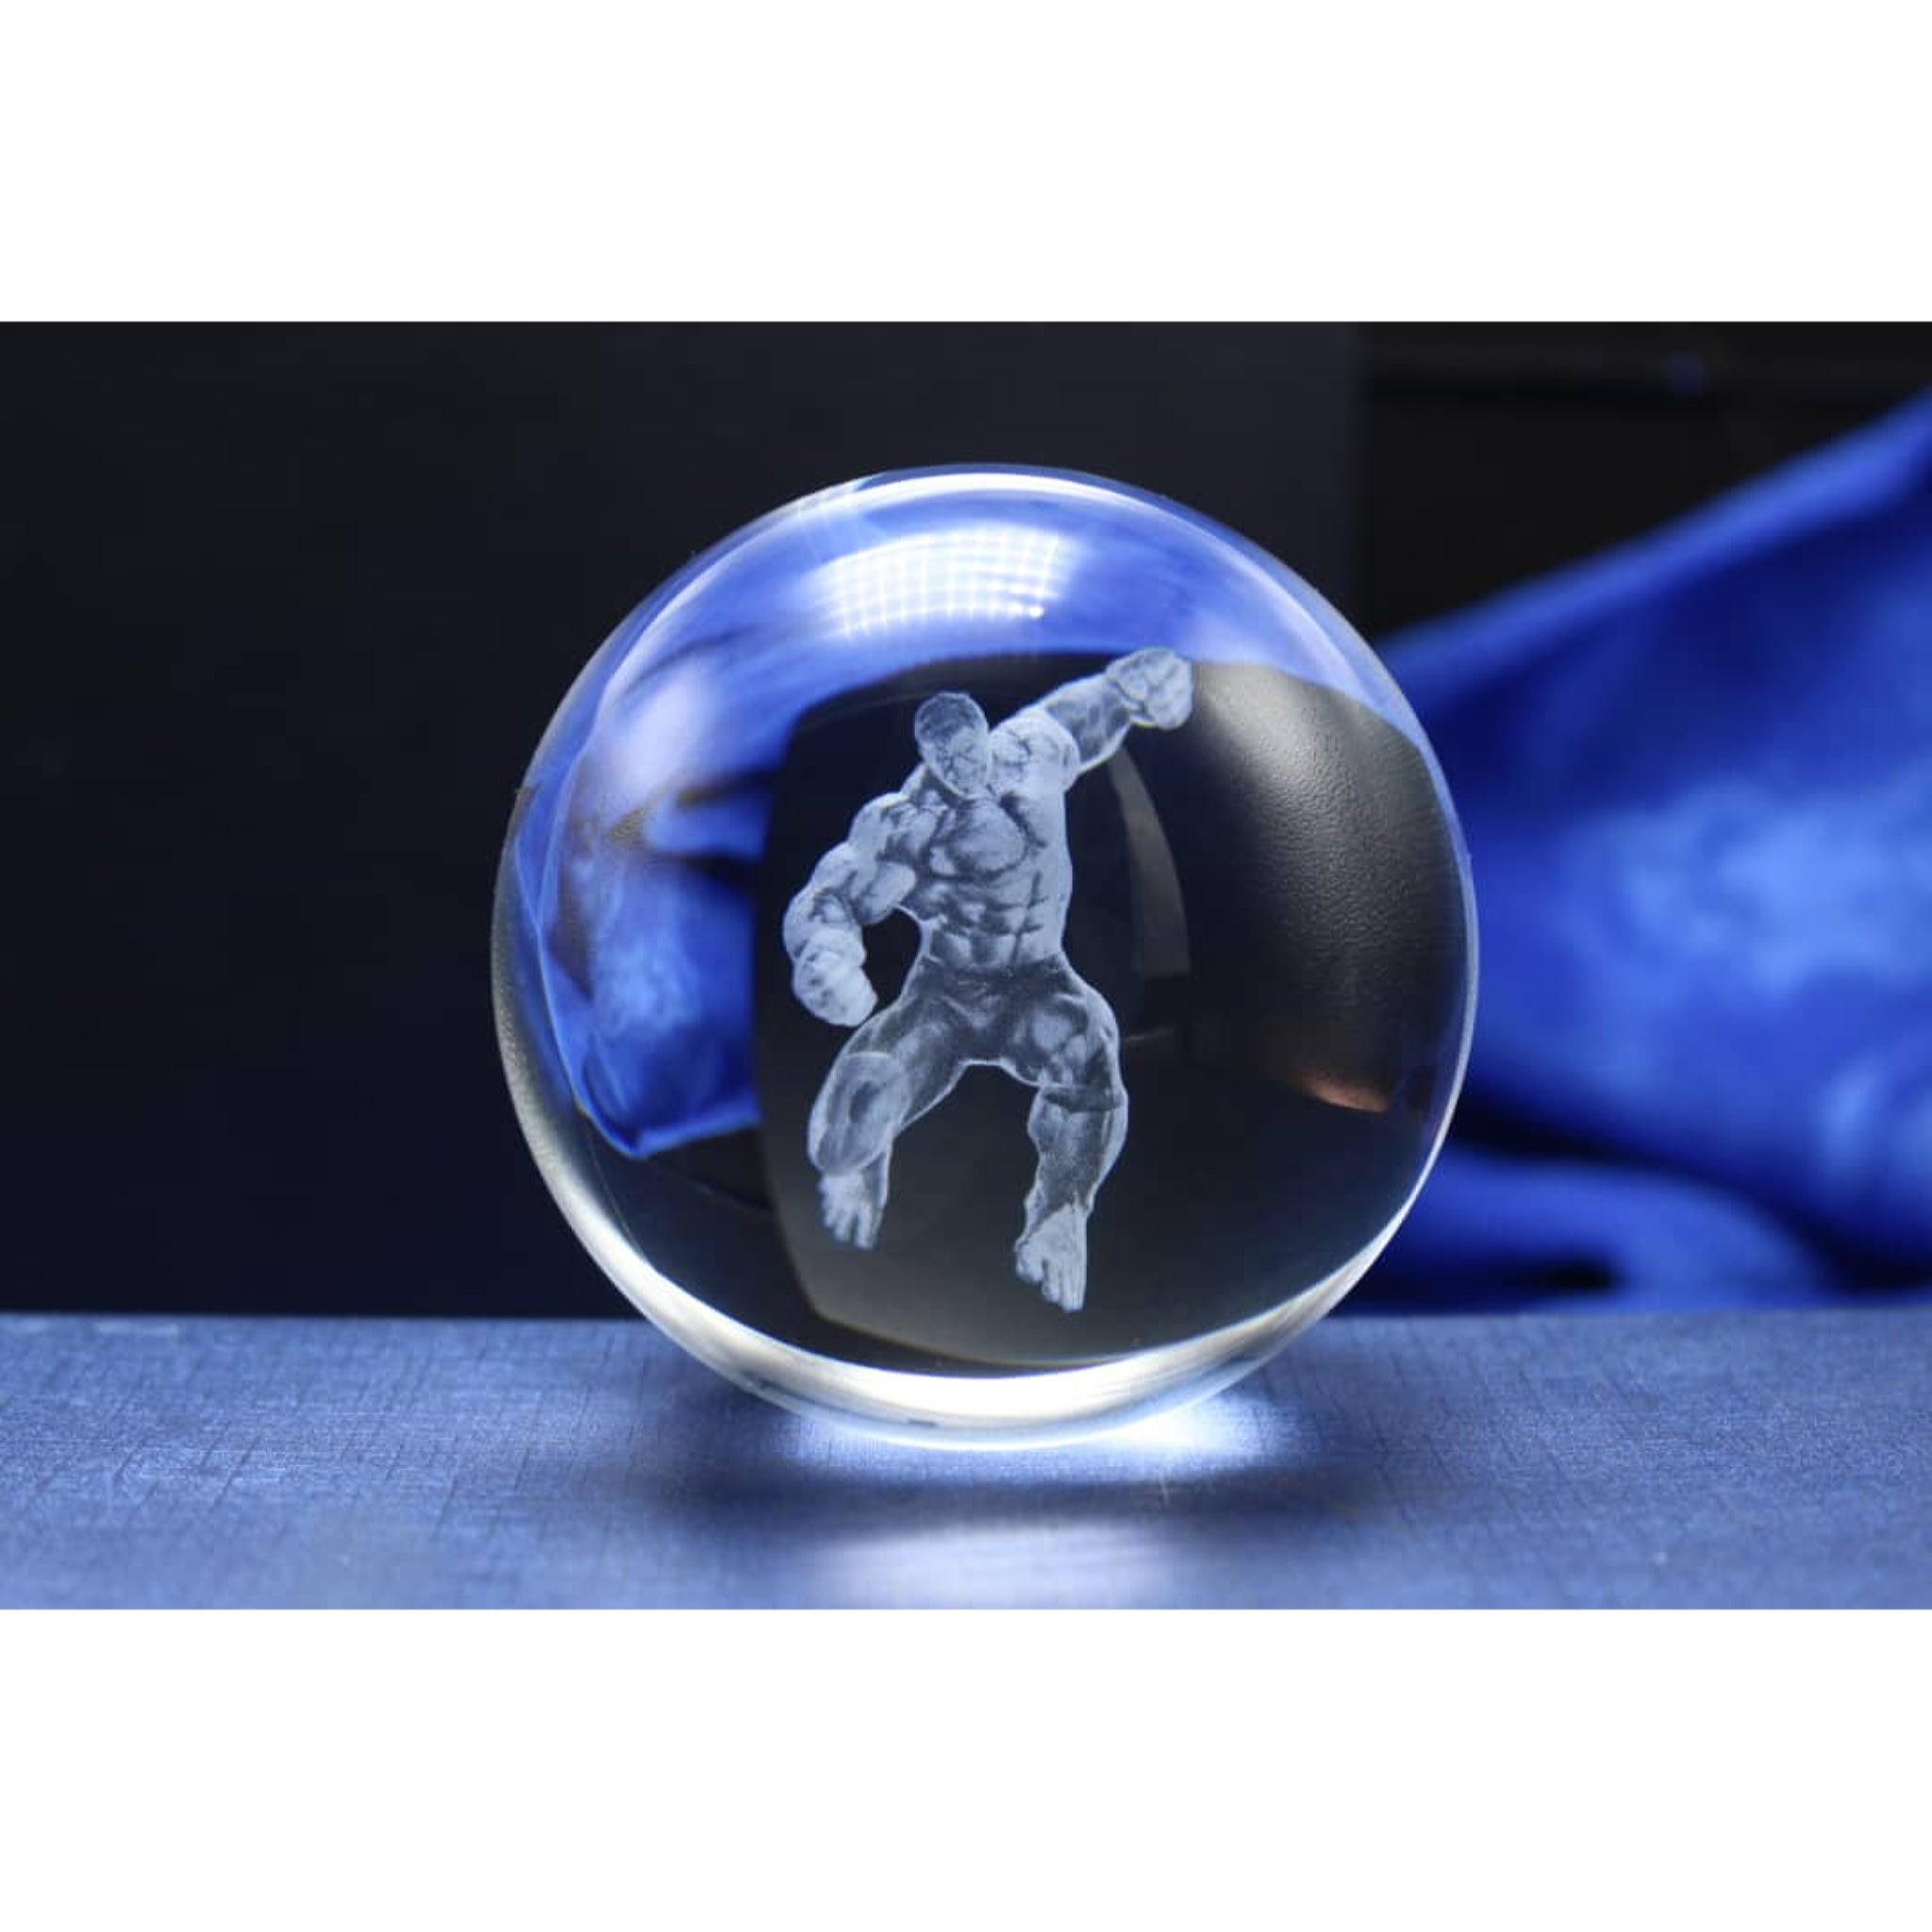 Hulk Character Glass Crystal Ball 59 with Light-Up LED Base Ornament 80mm XL Size